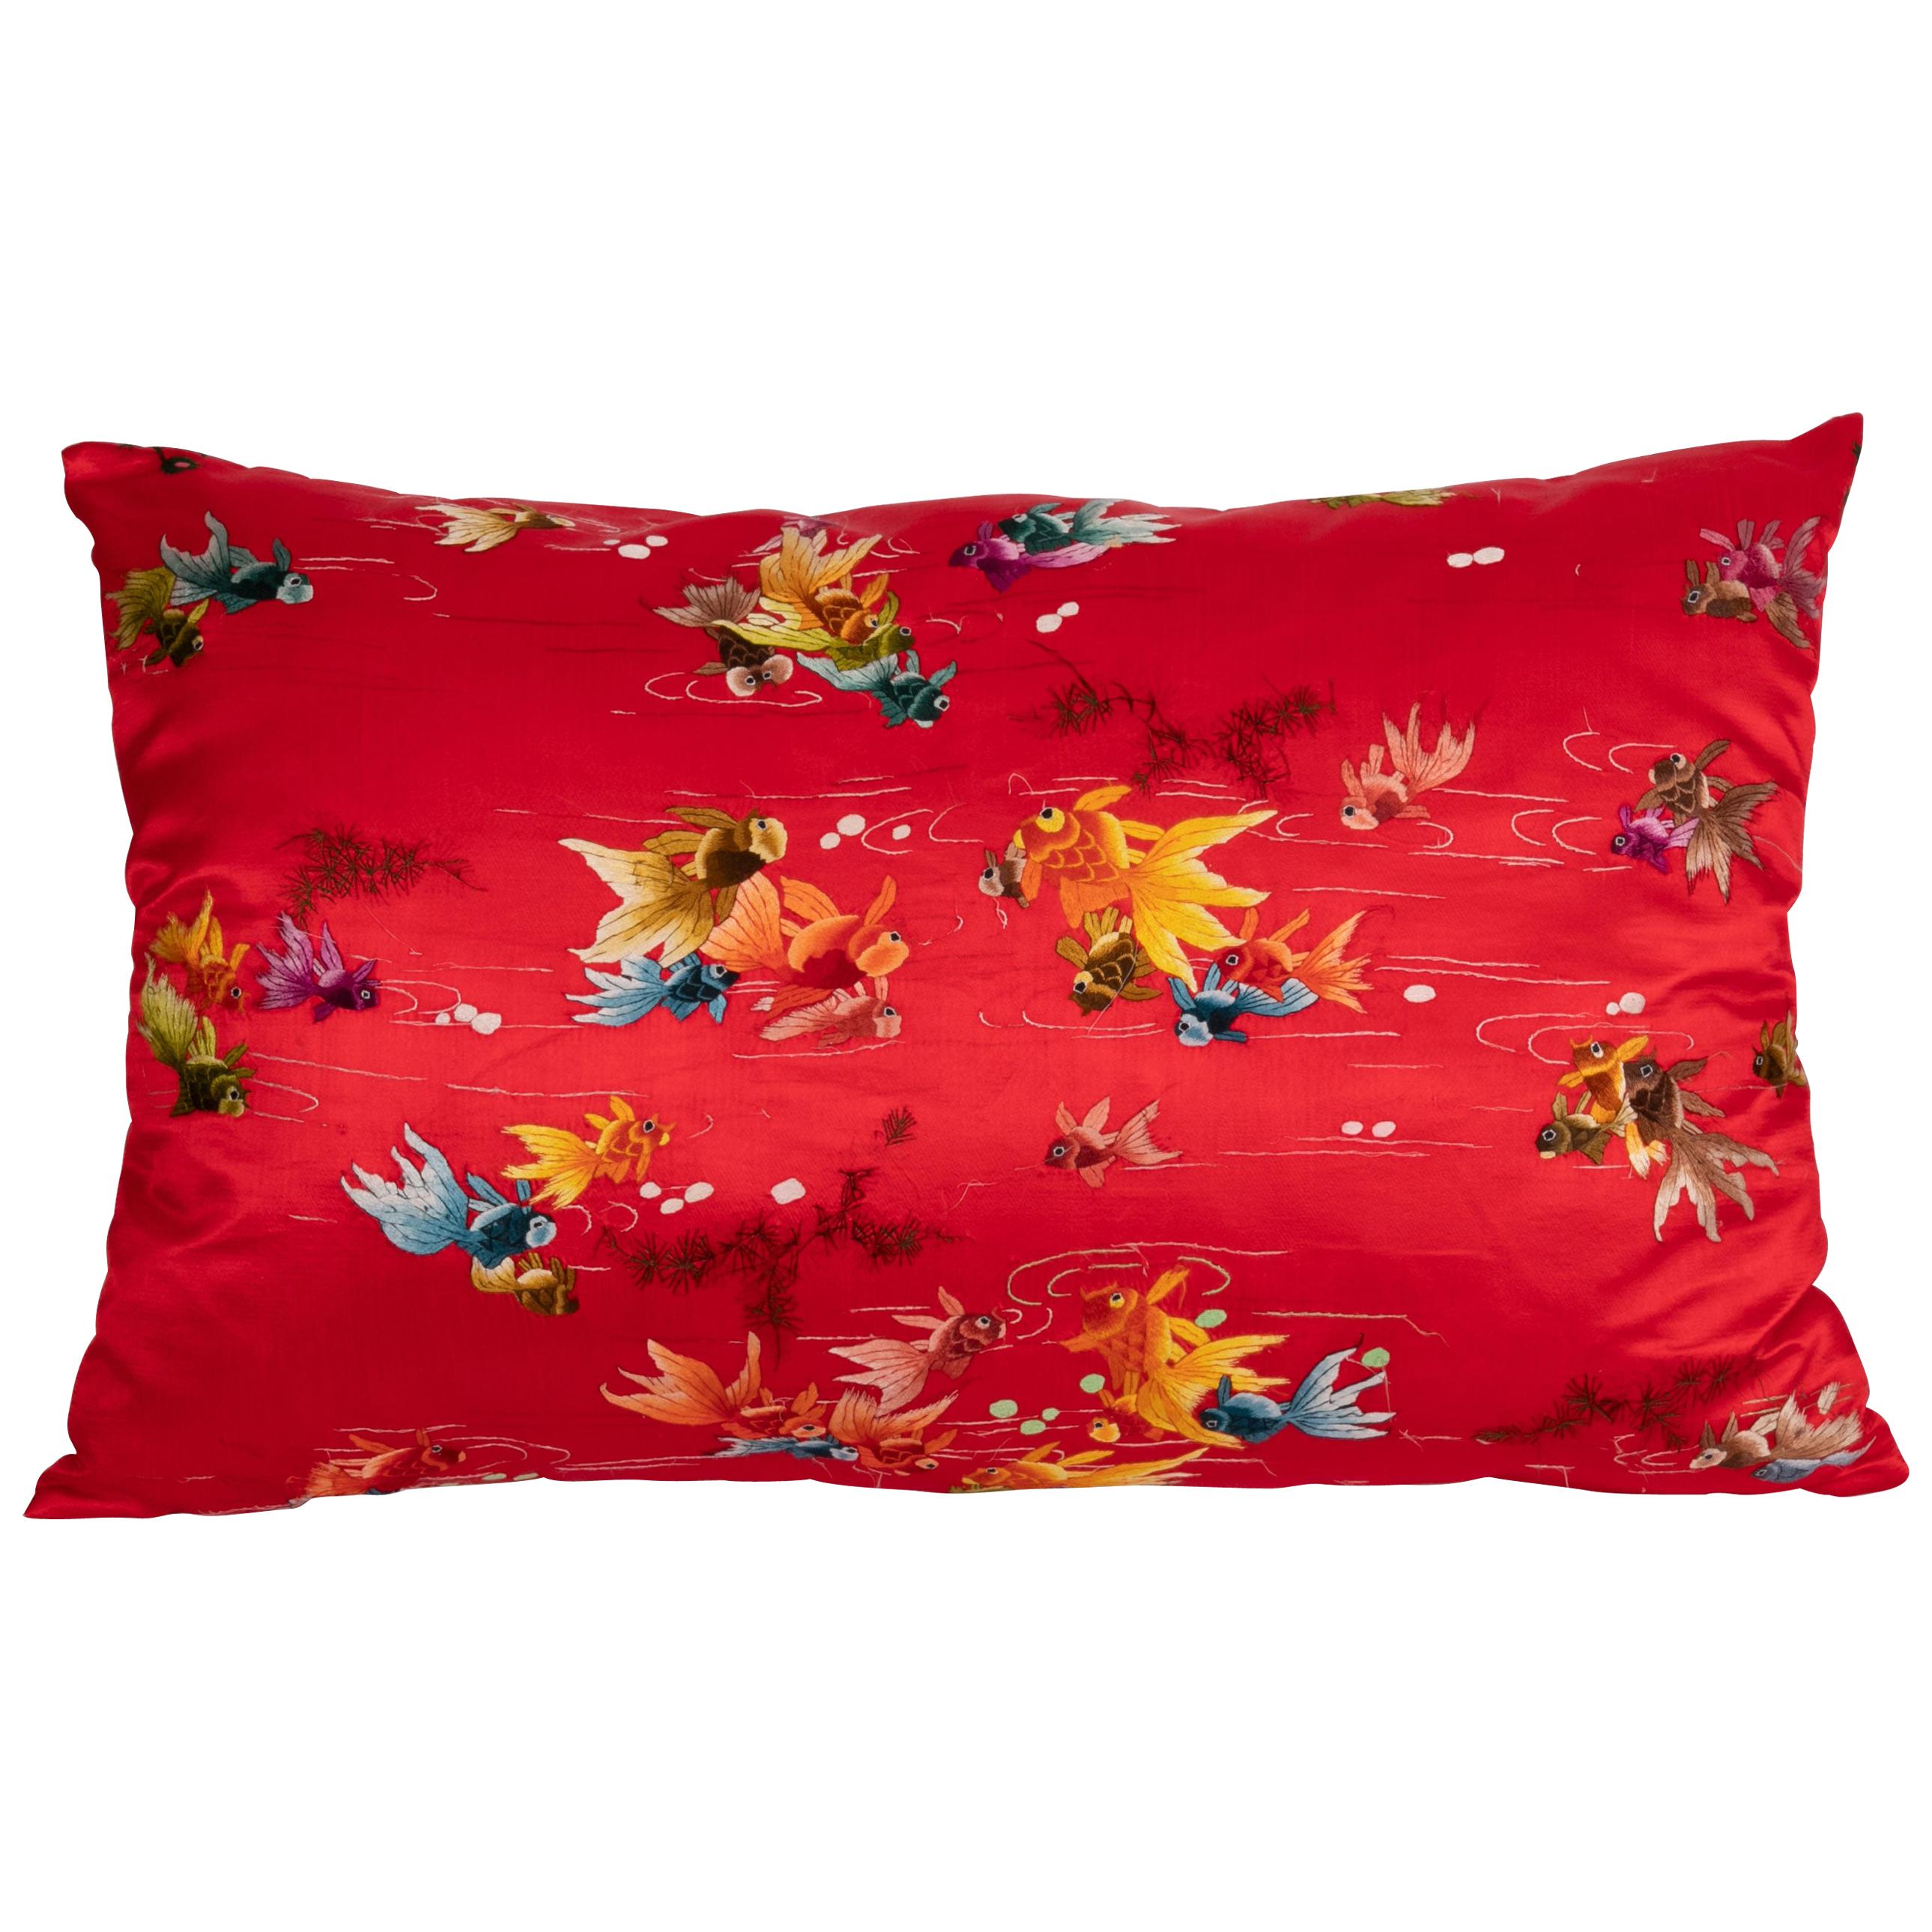 Pillowcase Made from a Vintage Asian Embroidery, Mid-20th Century For Sale